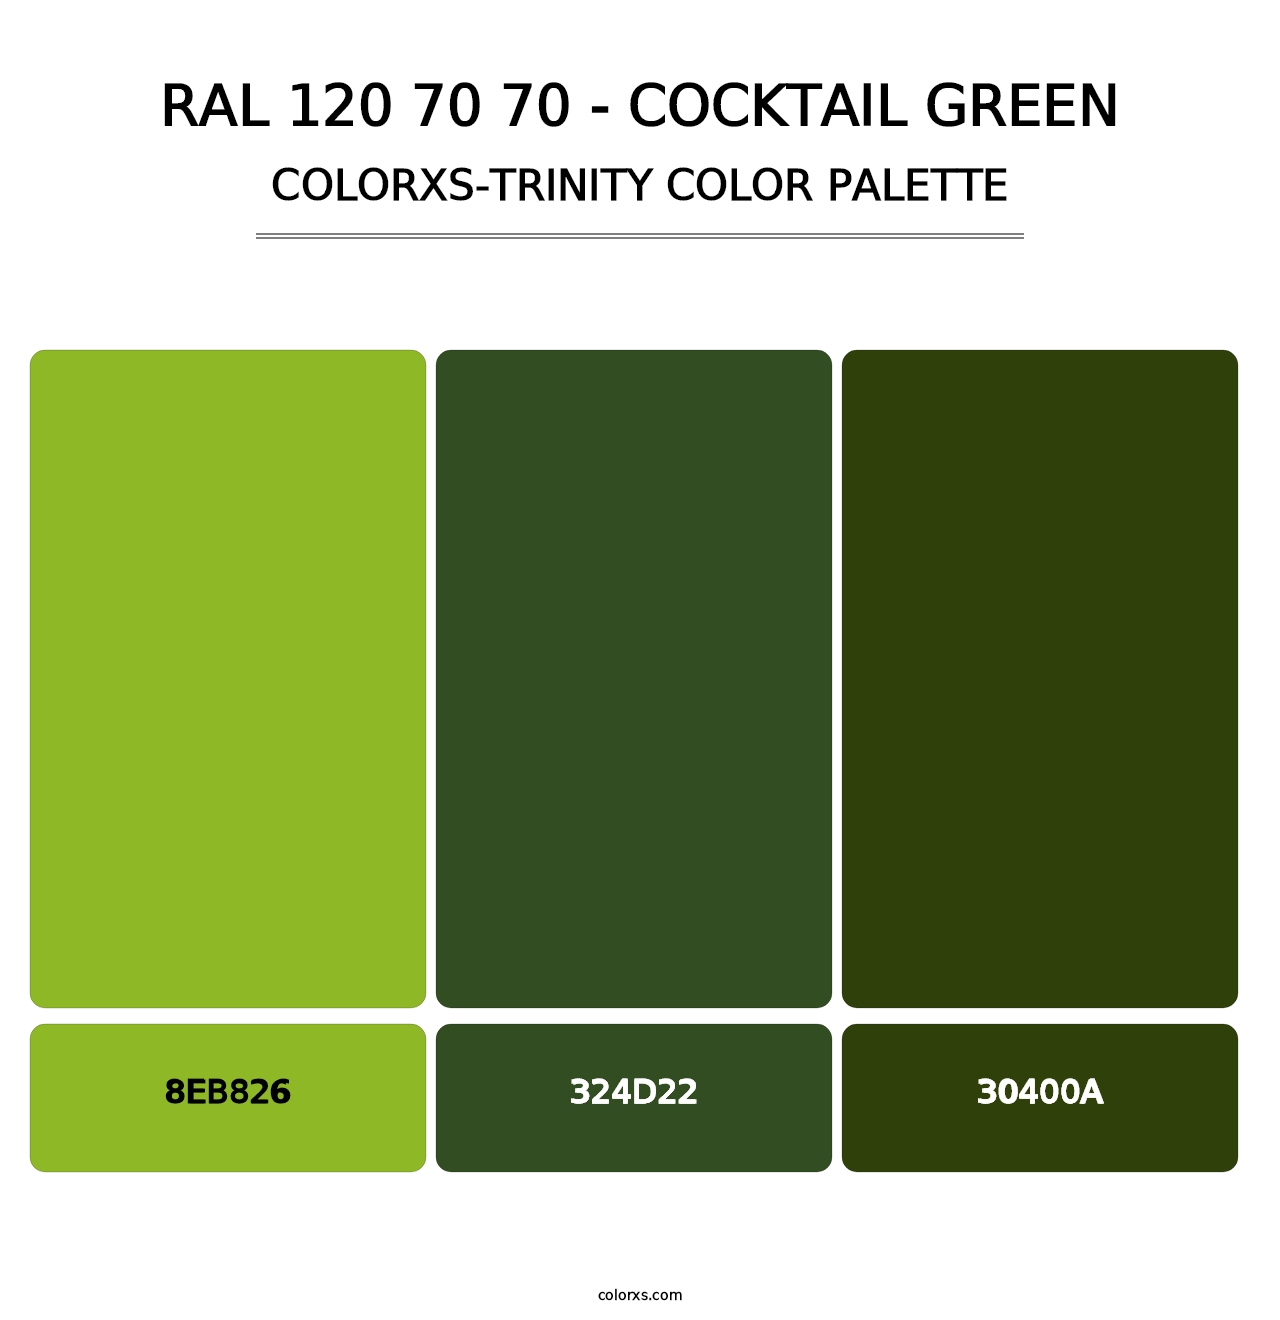 RAL 120 70 70 - Cocktail Green - Colorxs Trinity Palette